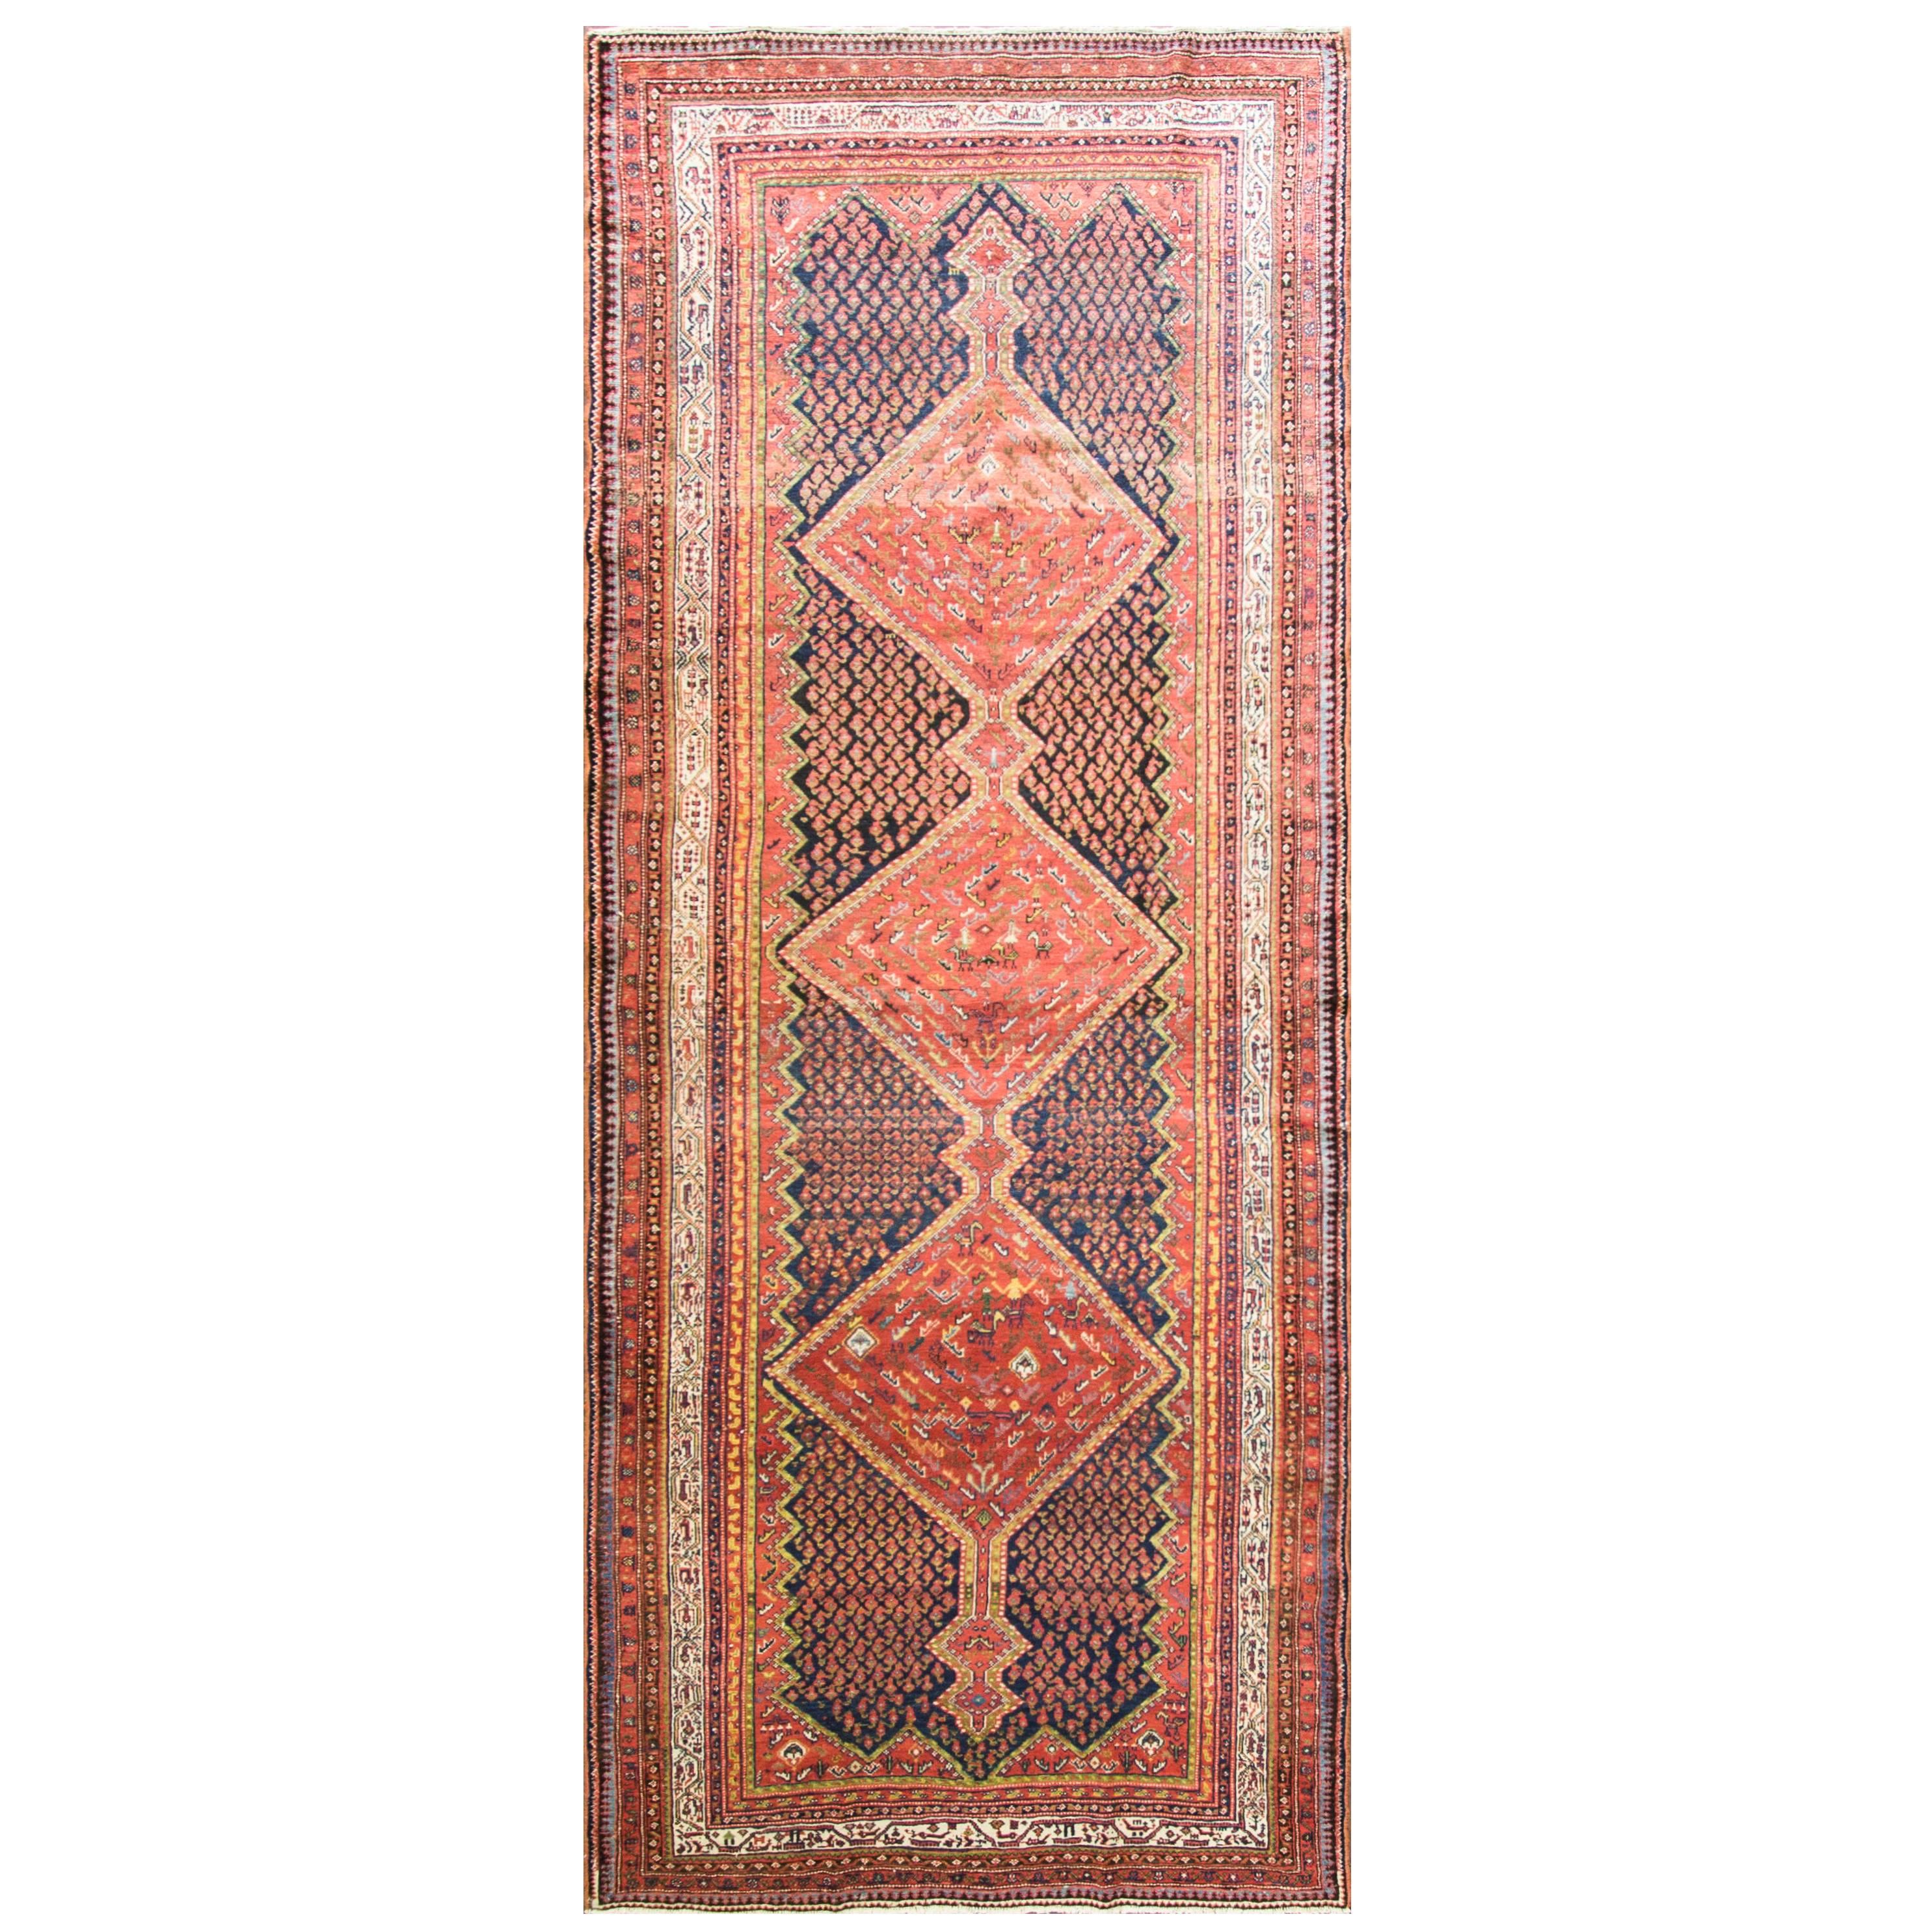  Antique Persian Malayer Gallery/ Runner/ Rug